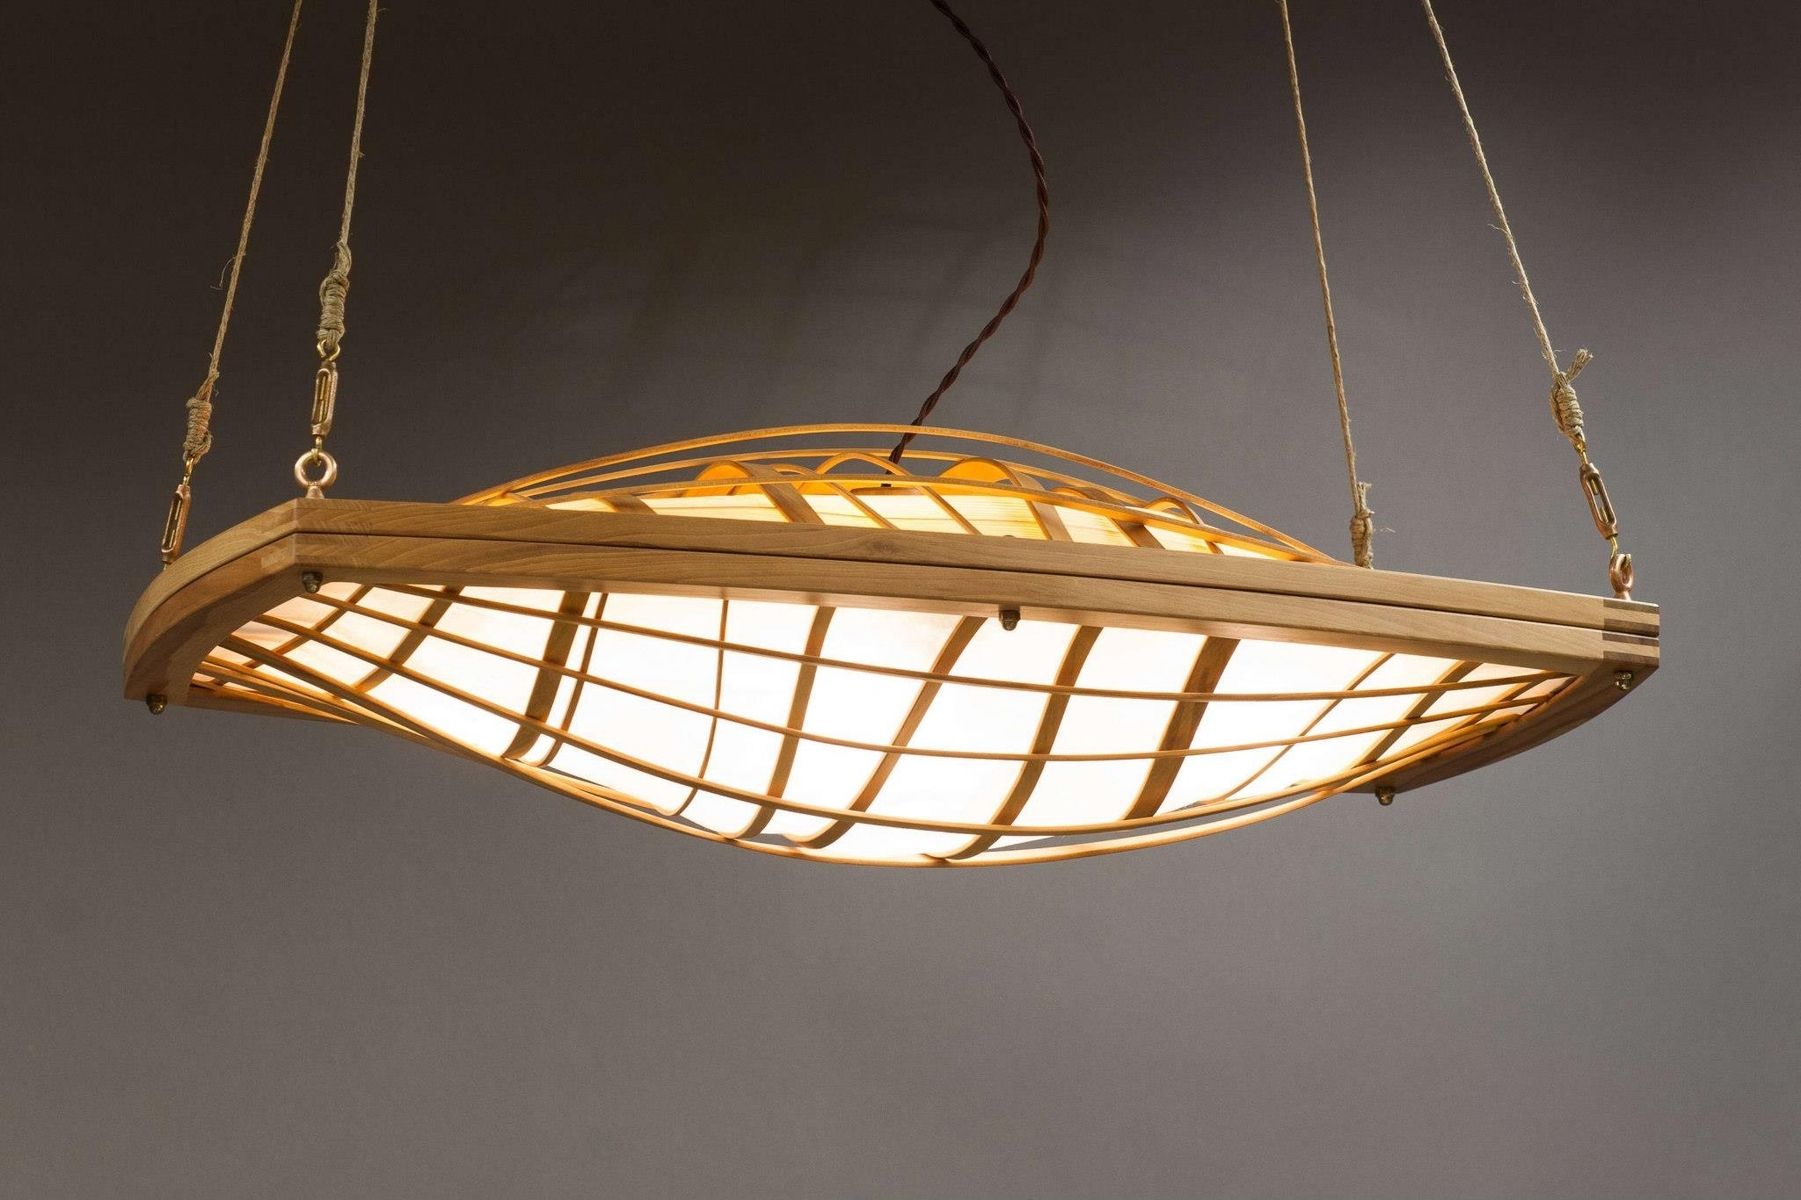 Handmade Lamps by Vorrath Woodworks | CustomMade.com